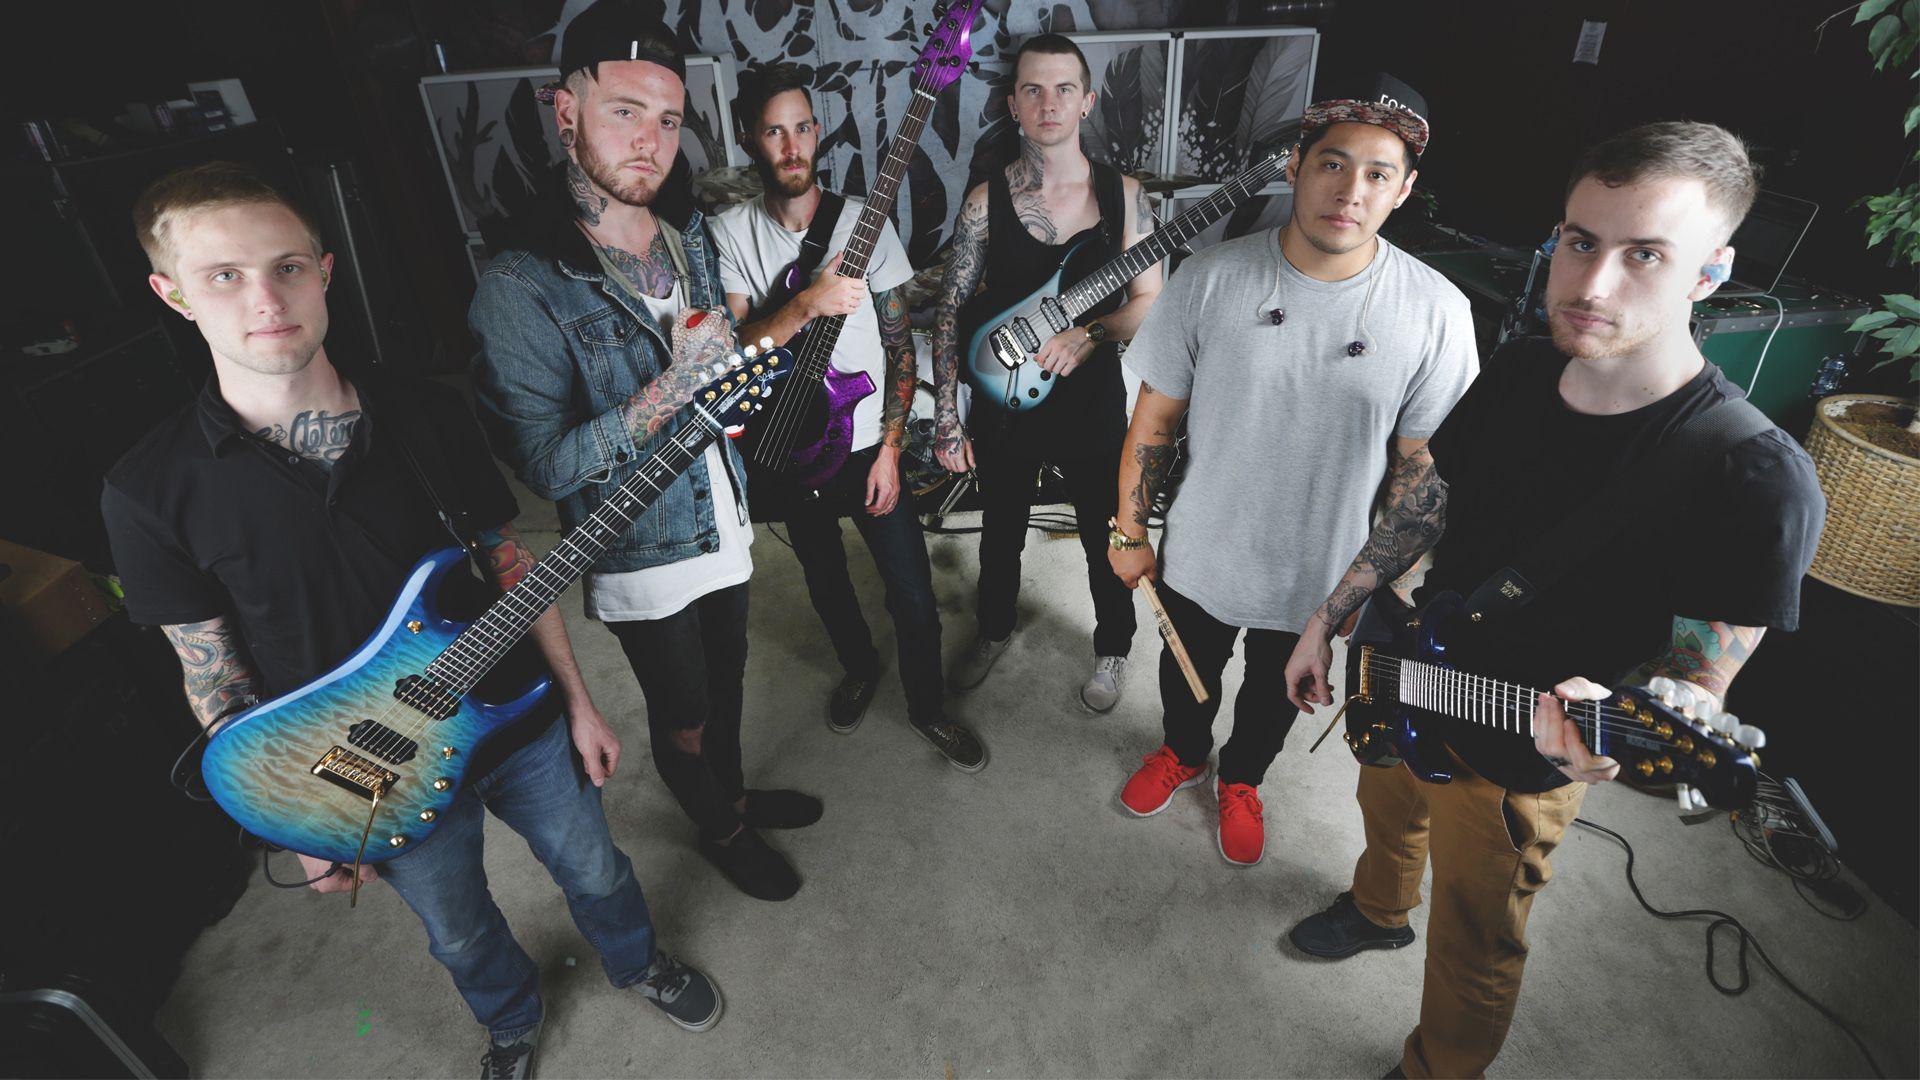 Chelsea Grin Wallpaper Image Photo Picture Background